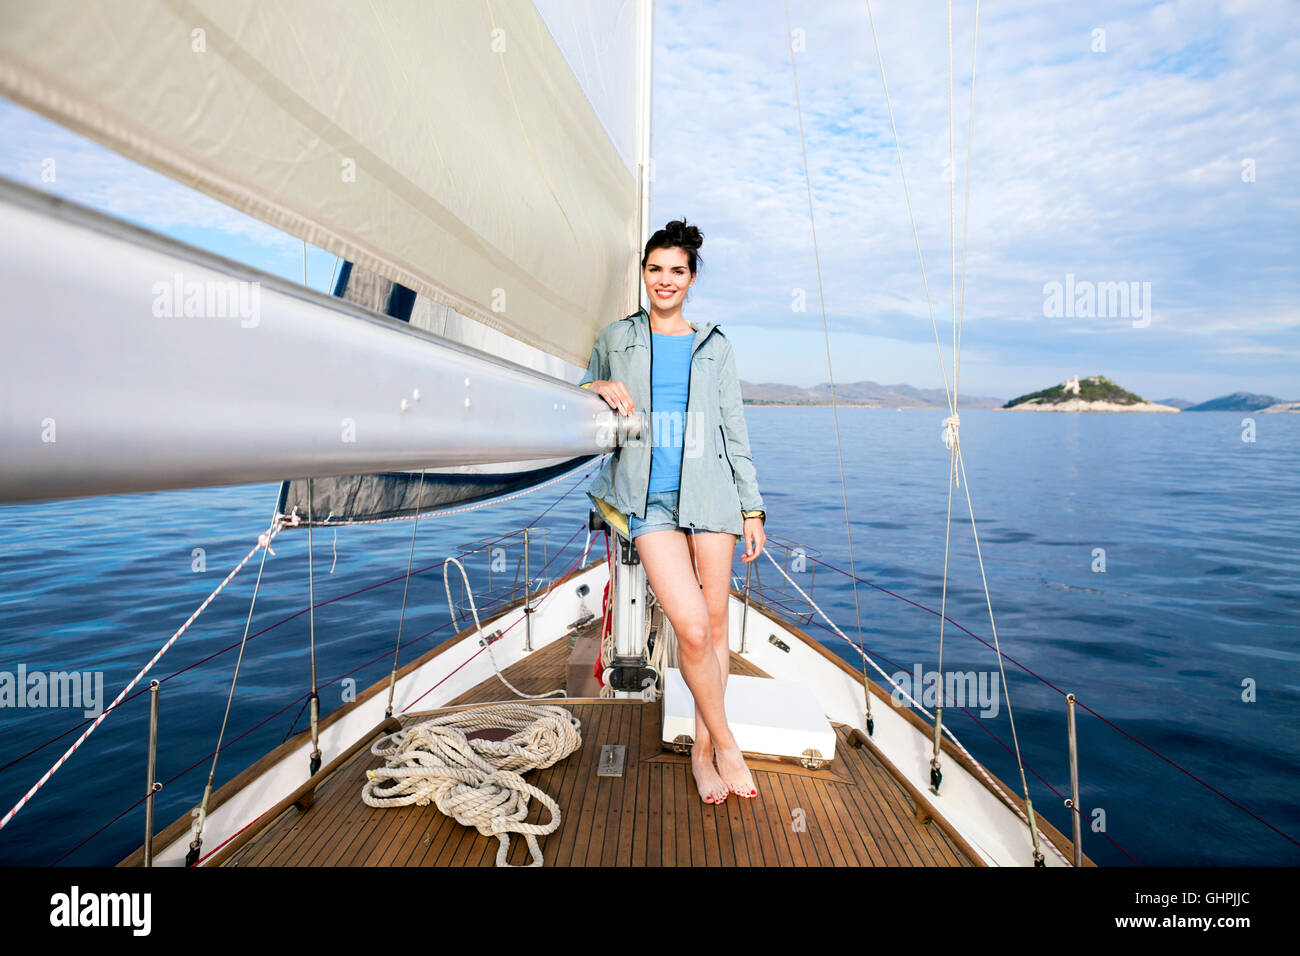 Young woman leaning on sailboat sail Stock Photo